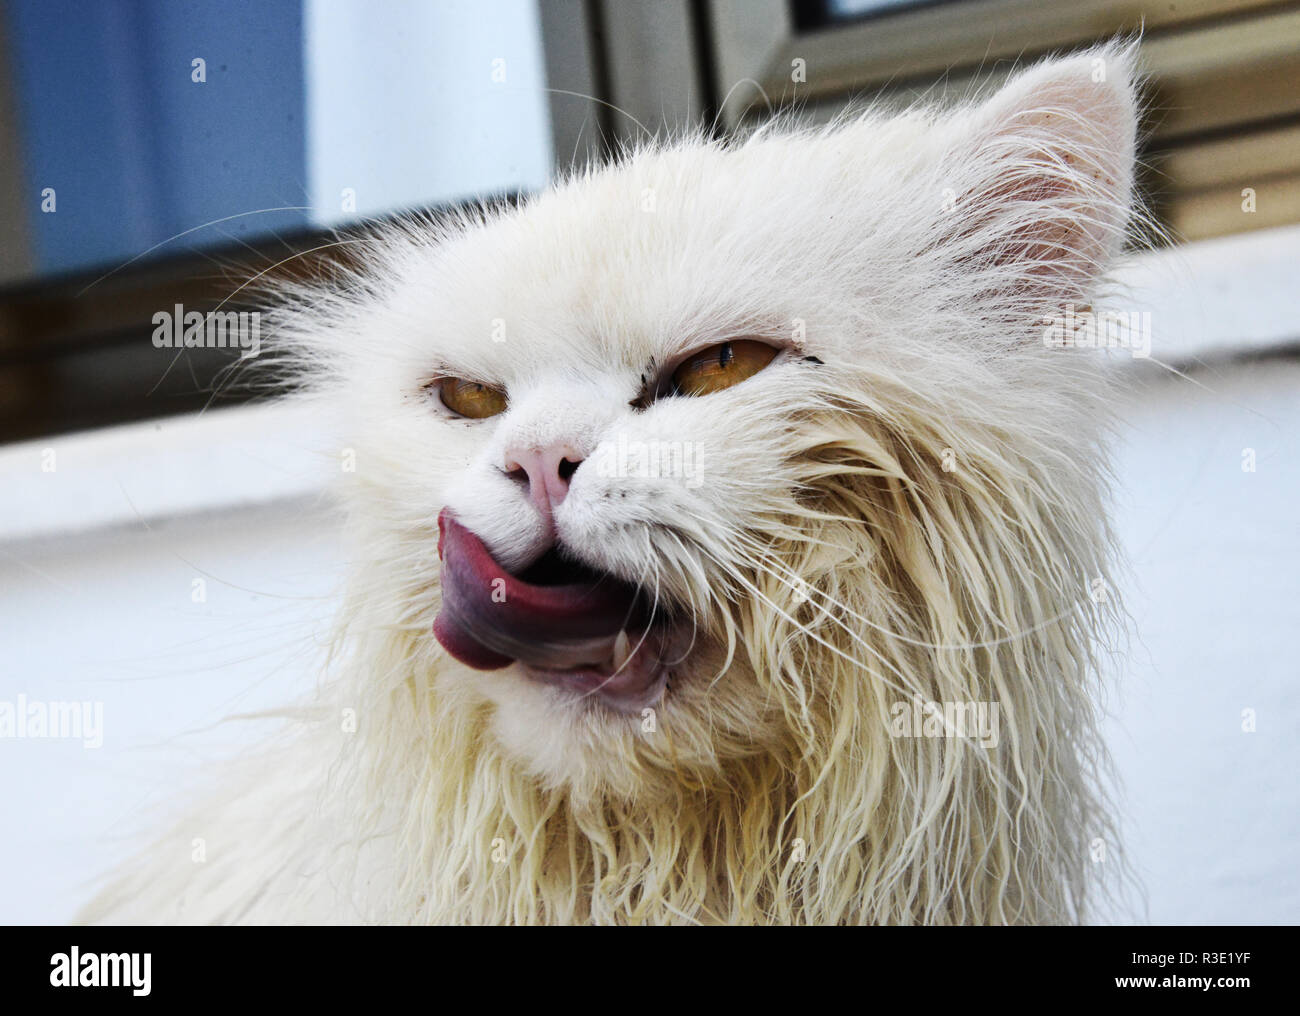 Angry wet cat licking its mouth Stock Photo